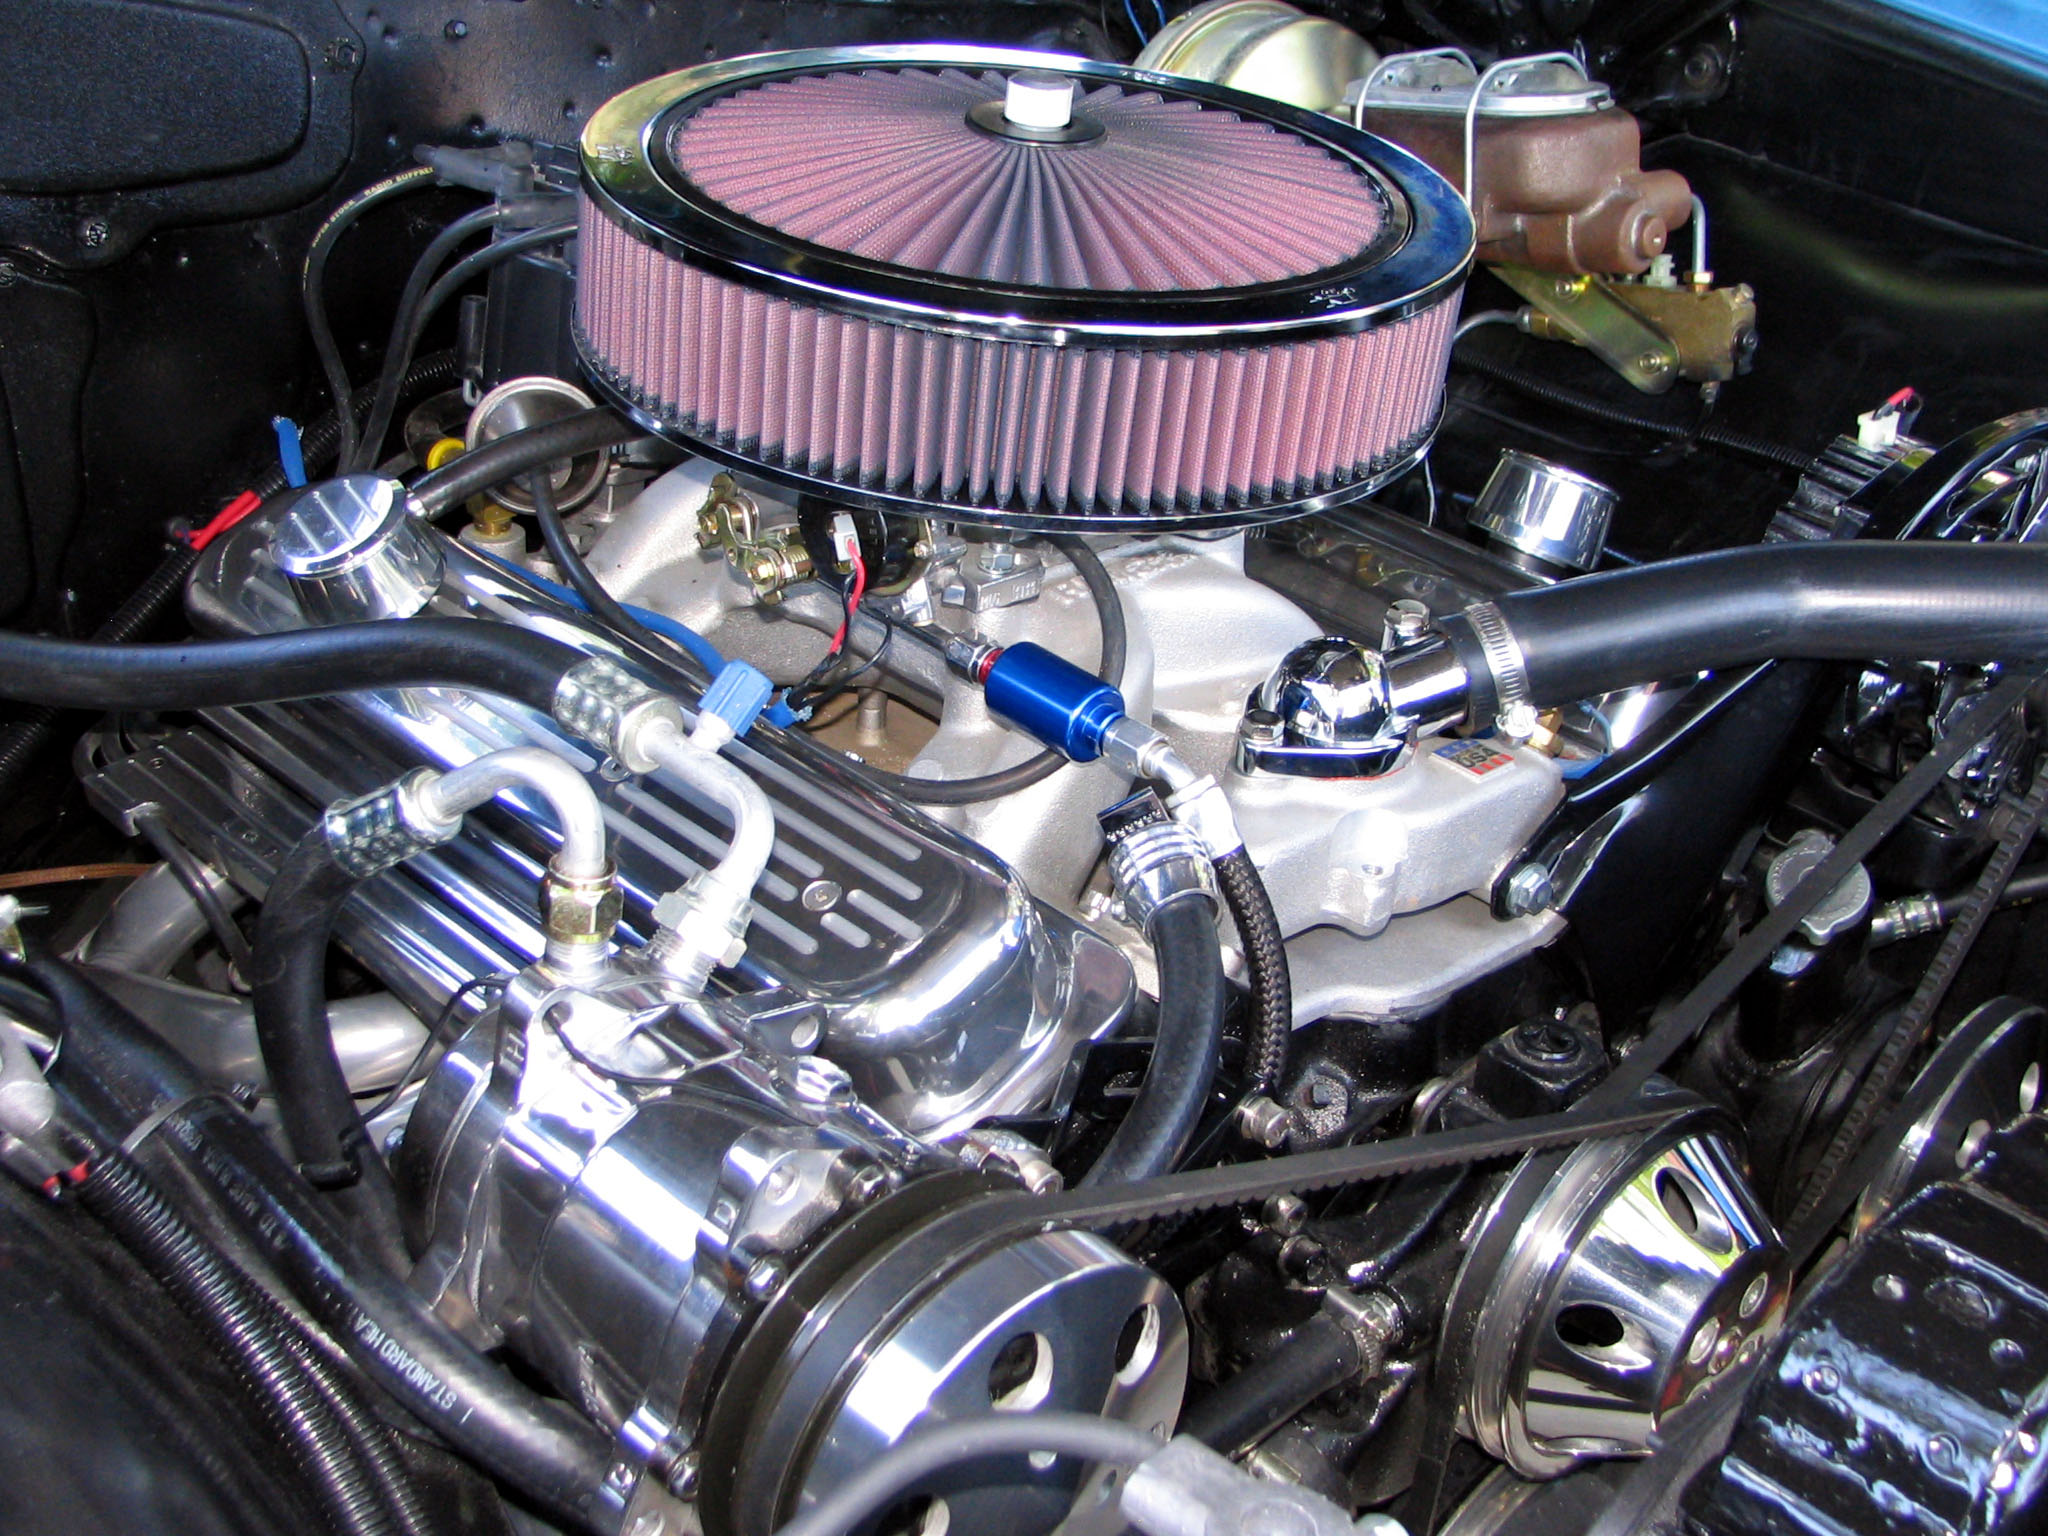 A Closer Look at the Engine Tune-Up: Then & Now